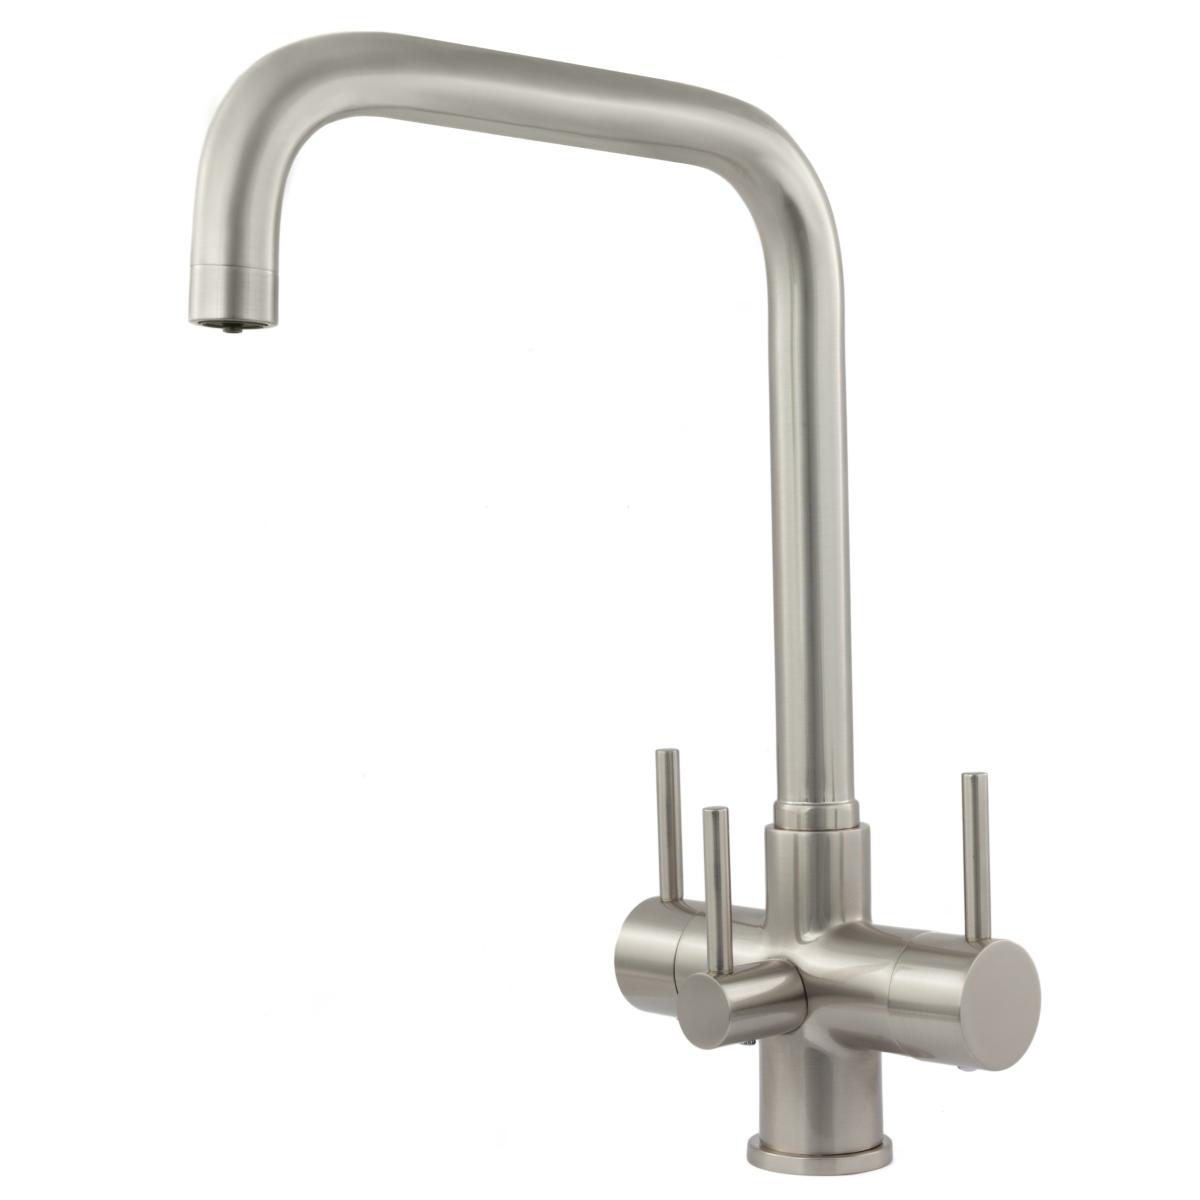 Monza 3 Lever 3 Way Kitchen Filter Tap Brushed Steel